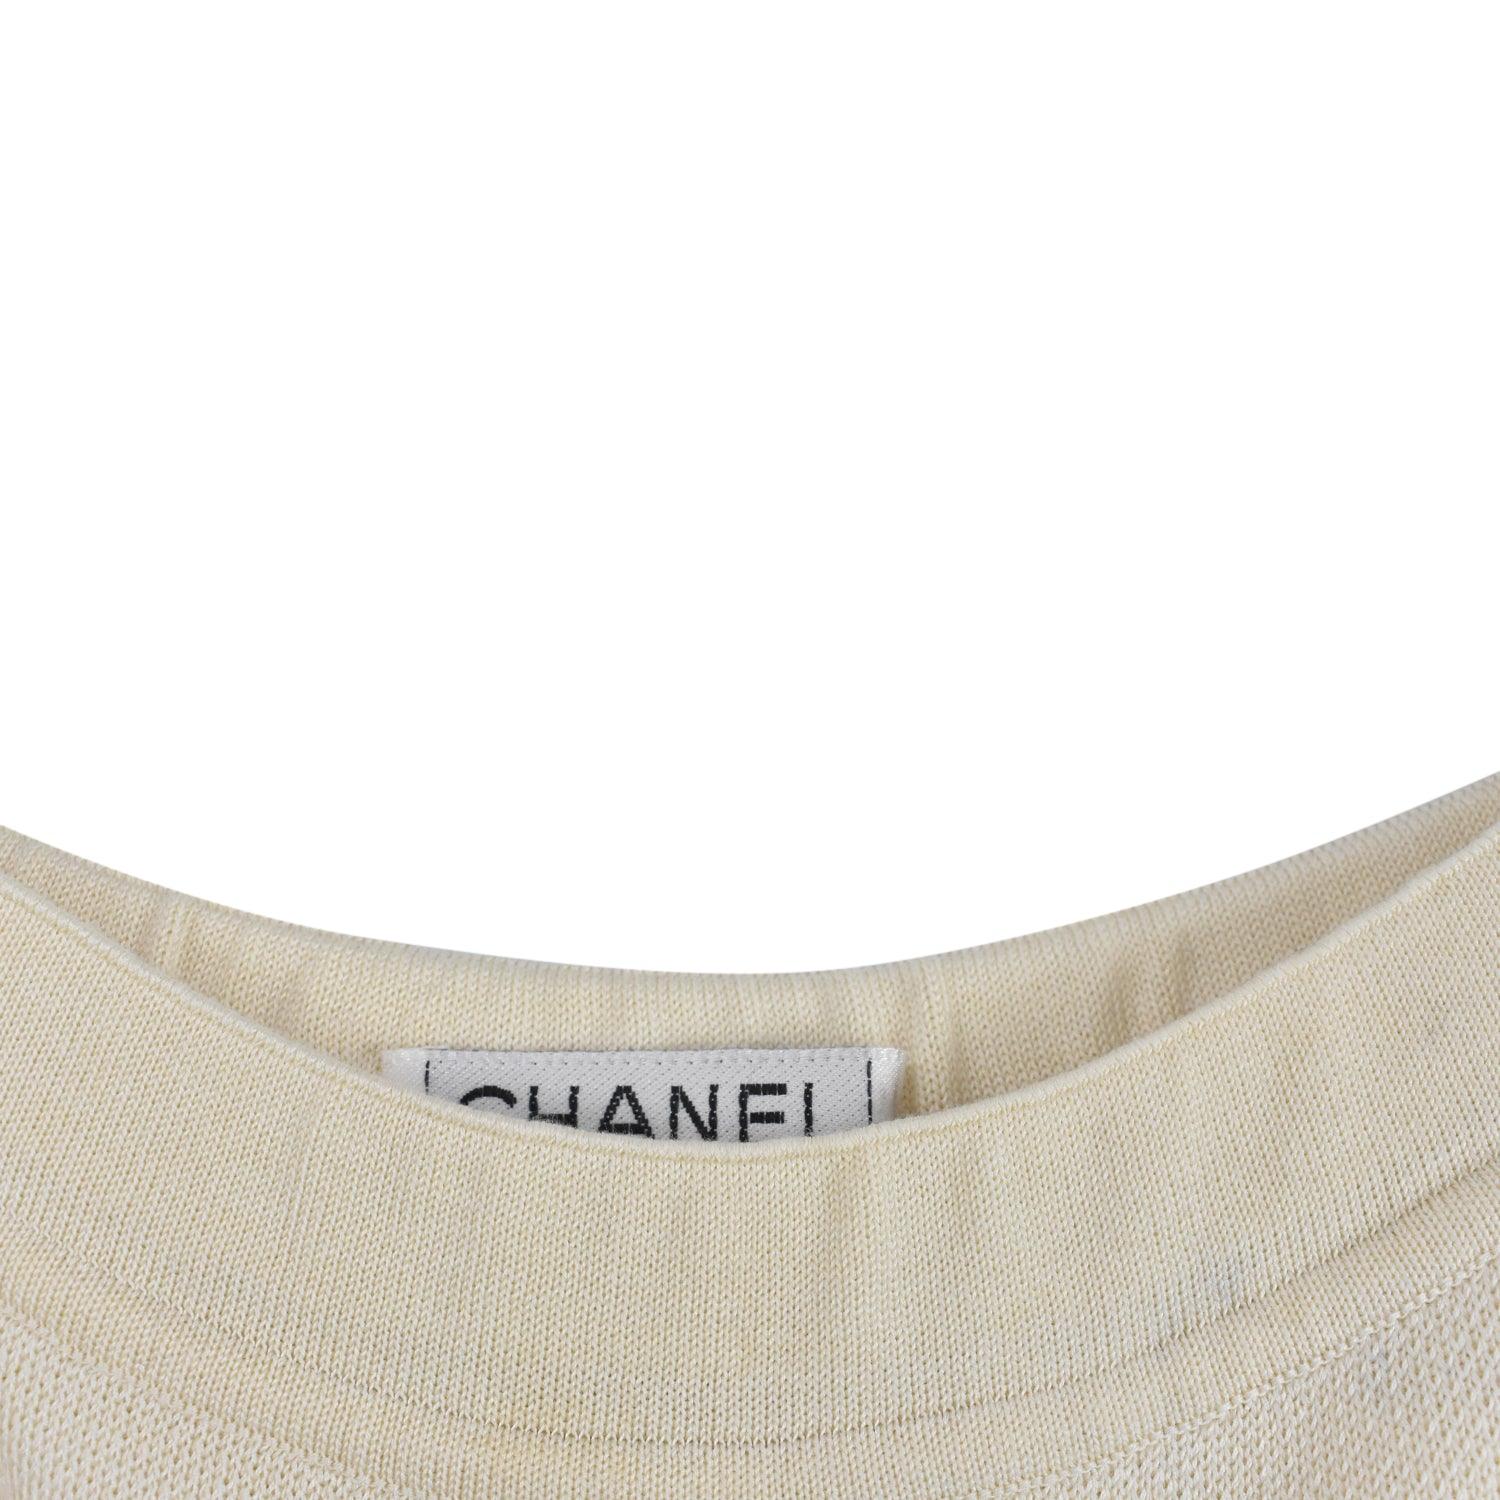 Chanel Pencil Skirt - Women's 40 - Fashionably Yours